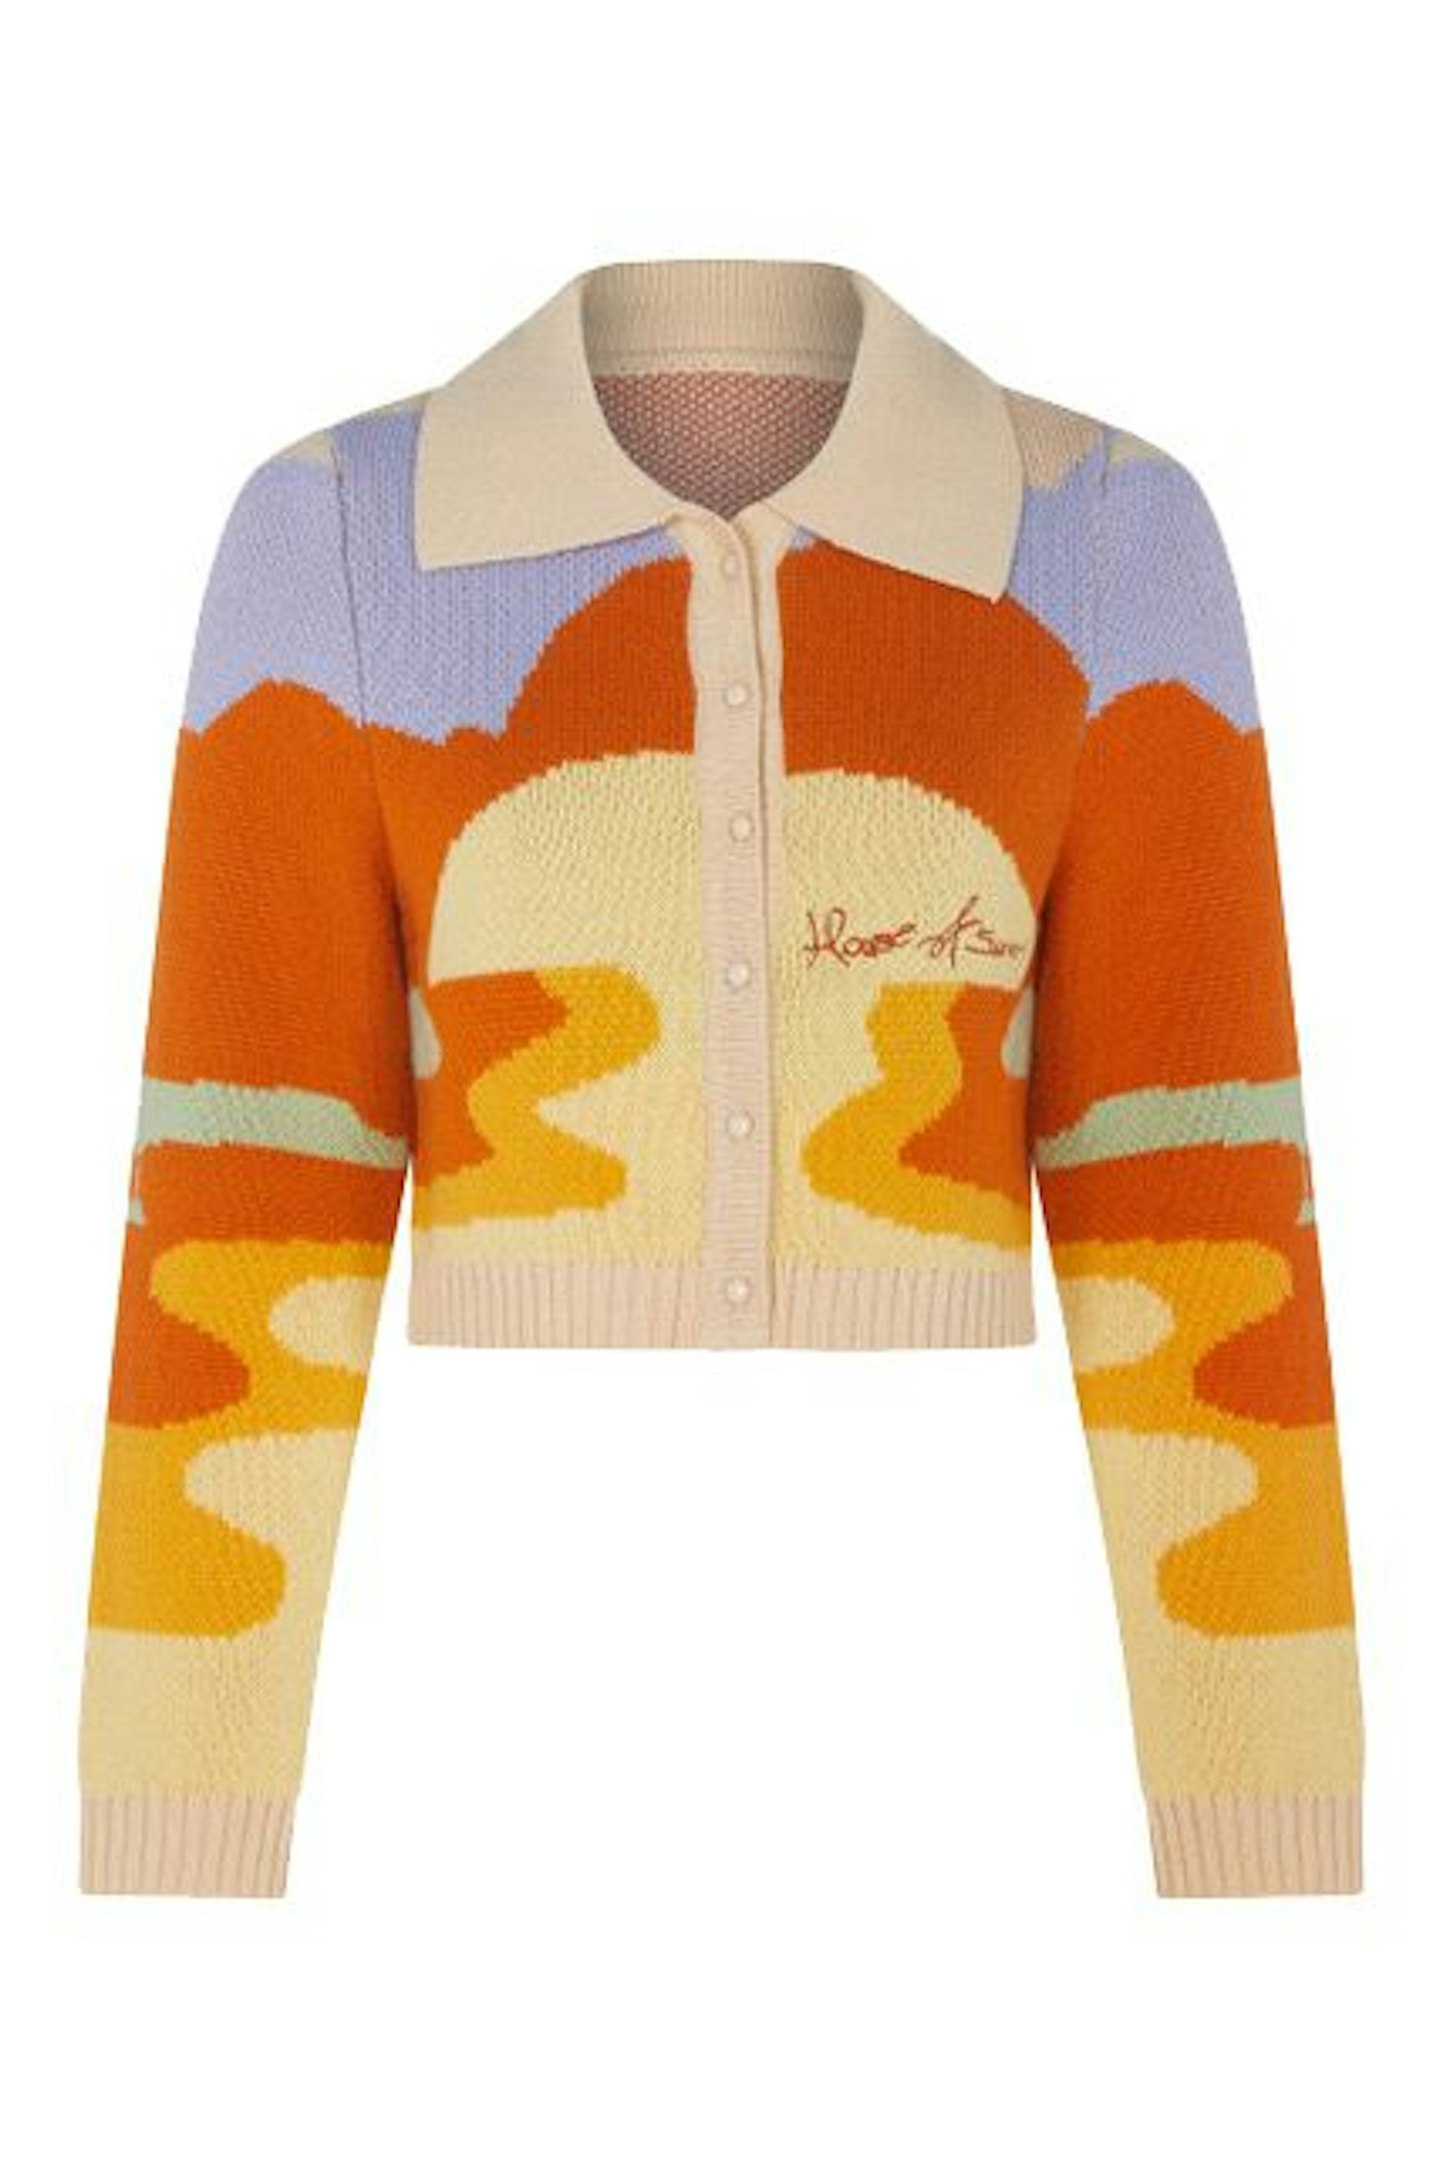 House Of Sunny, Day Tripper Cardigan, £90